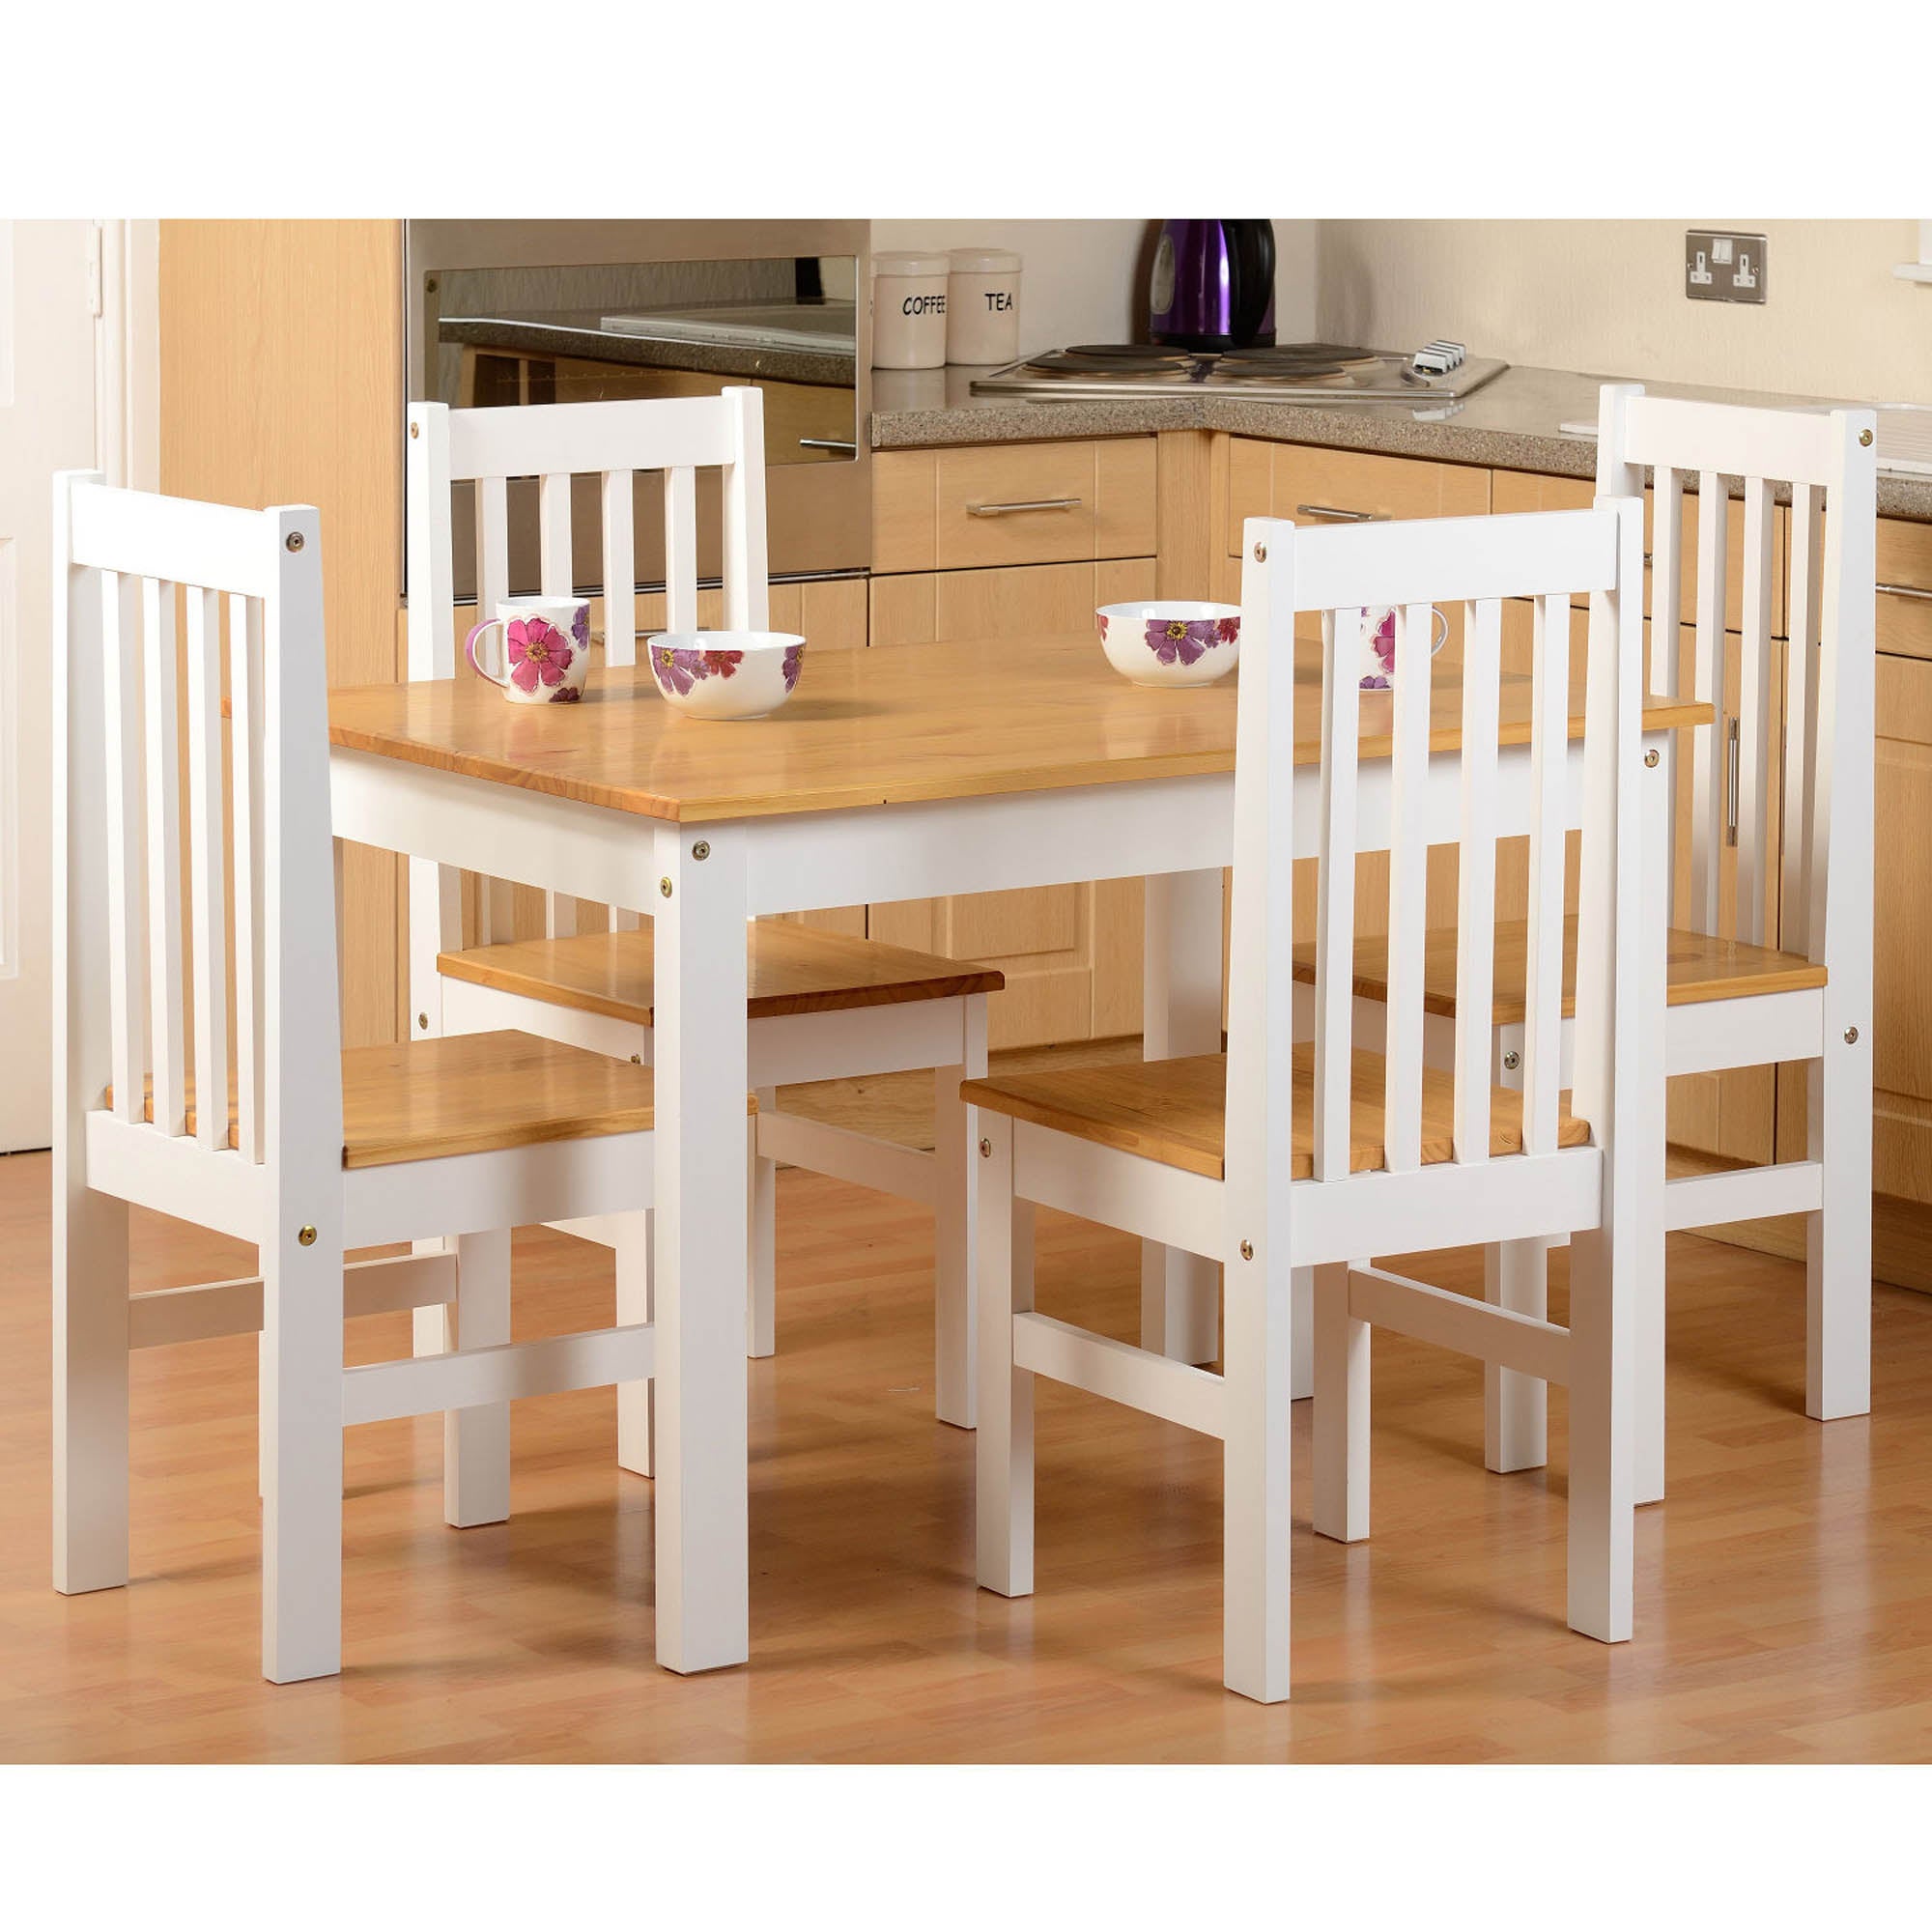 Ludlow Rectangular Dining Table with 4 Chairs, White